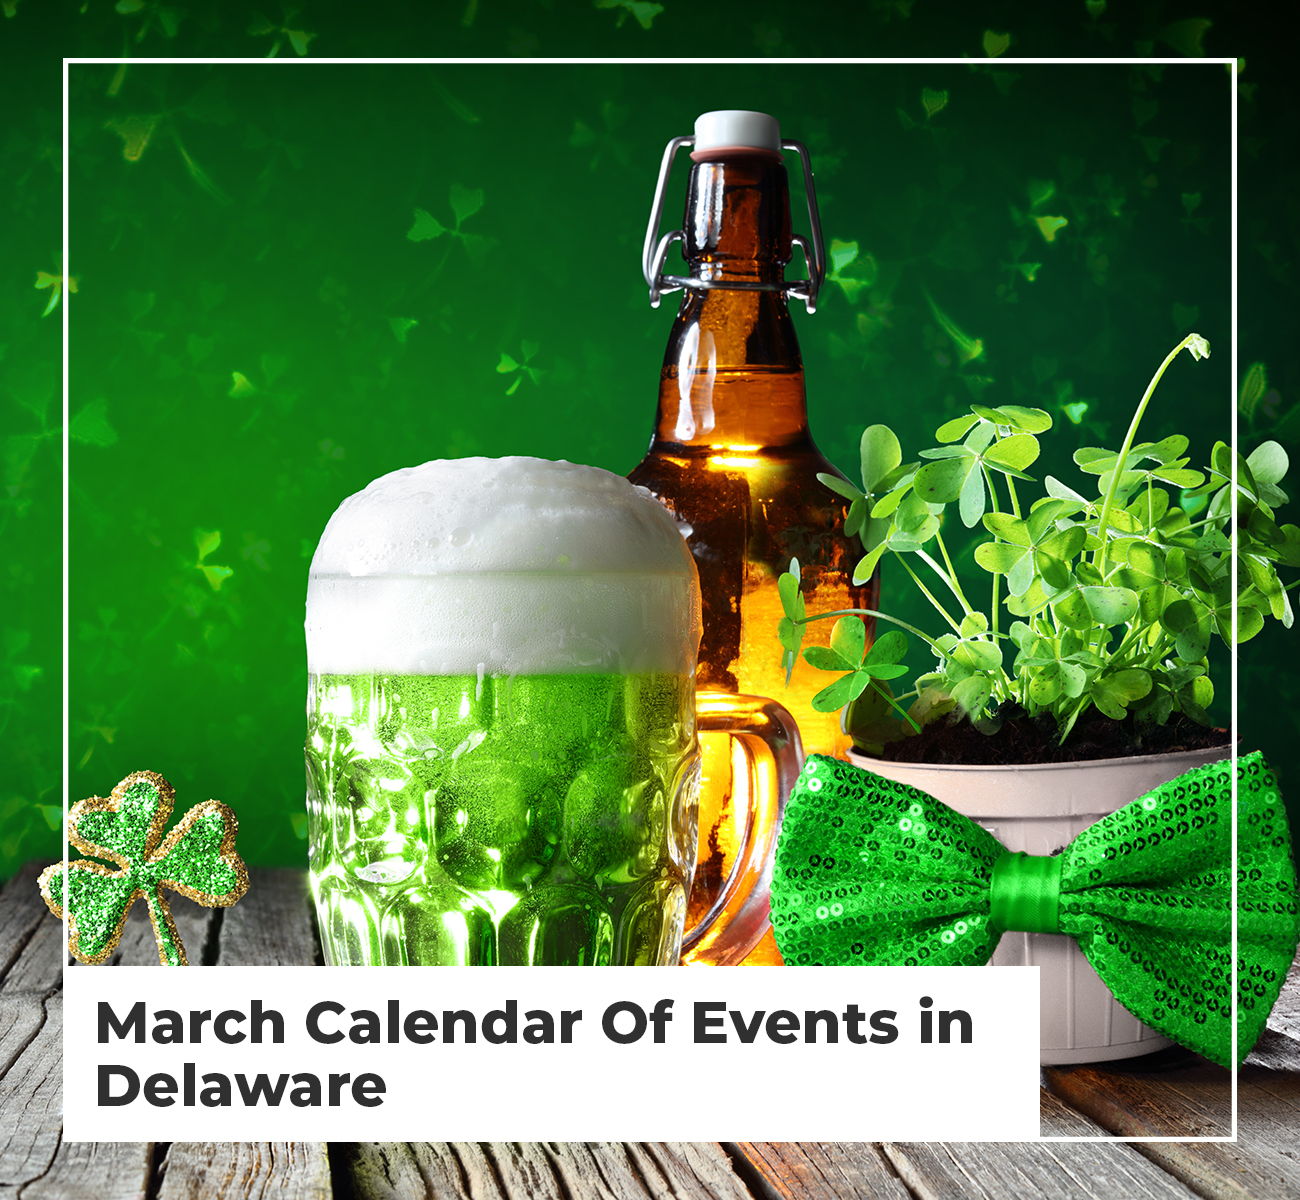 March Calendar of Events in Delaware